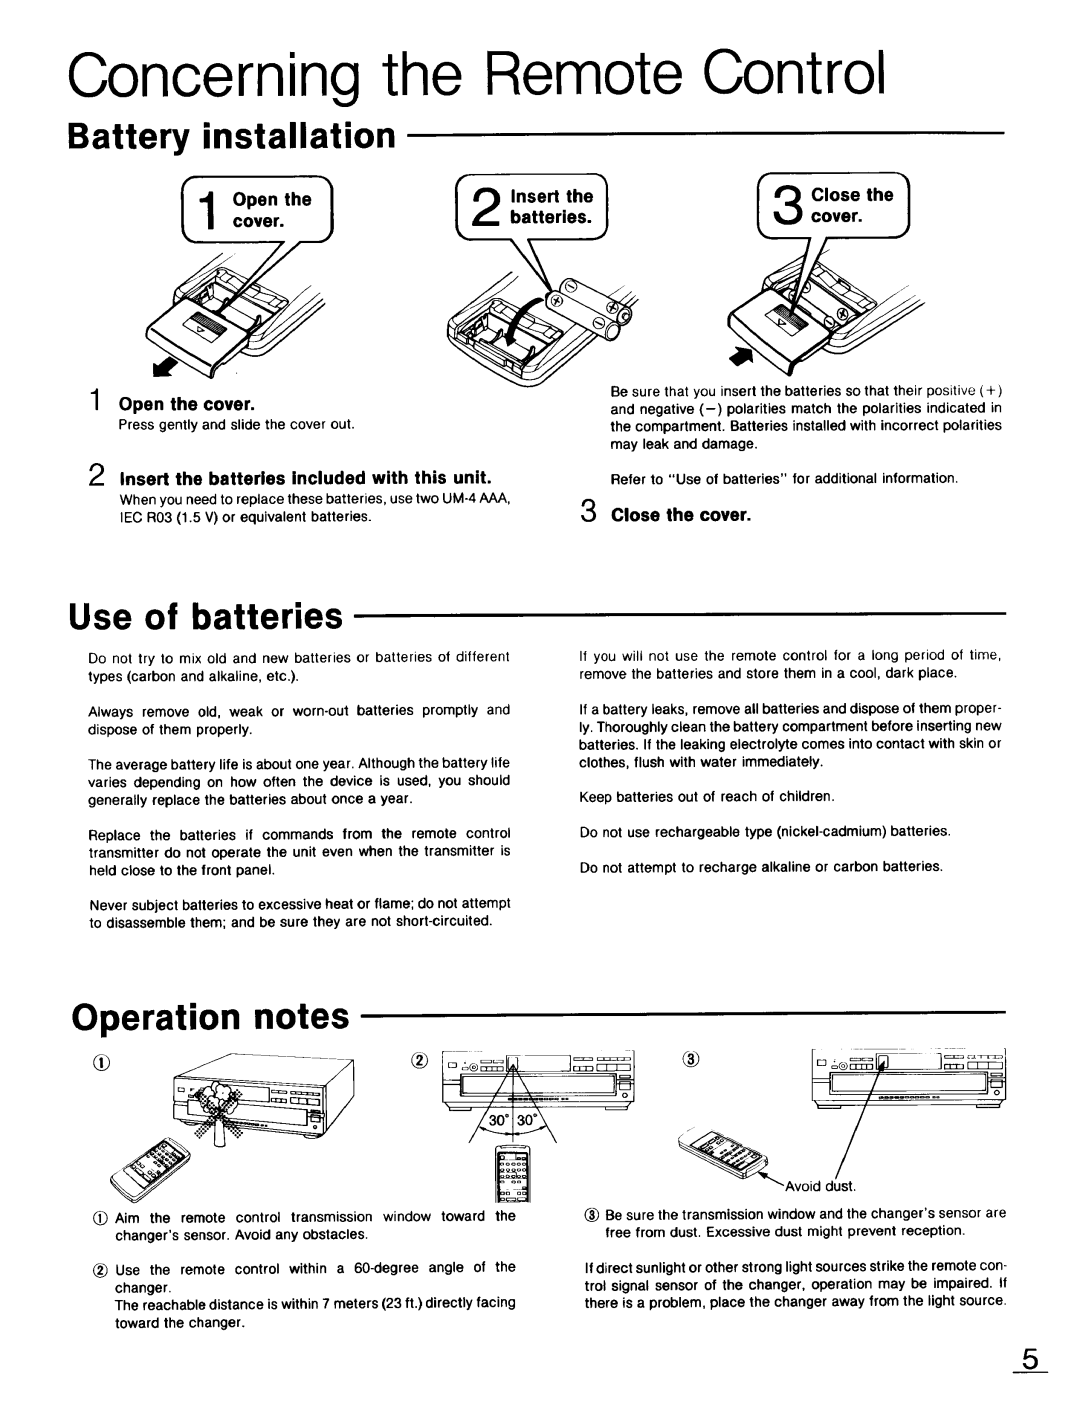 Technics SL-PD947 Concerning the Remote Control, Battery installation, Use of batteries, Operation notes, cover, Openthe 